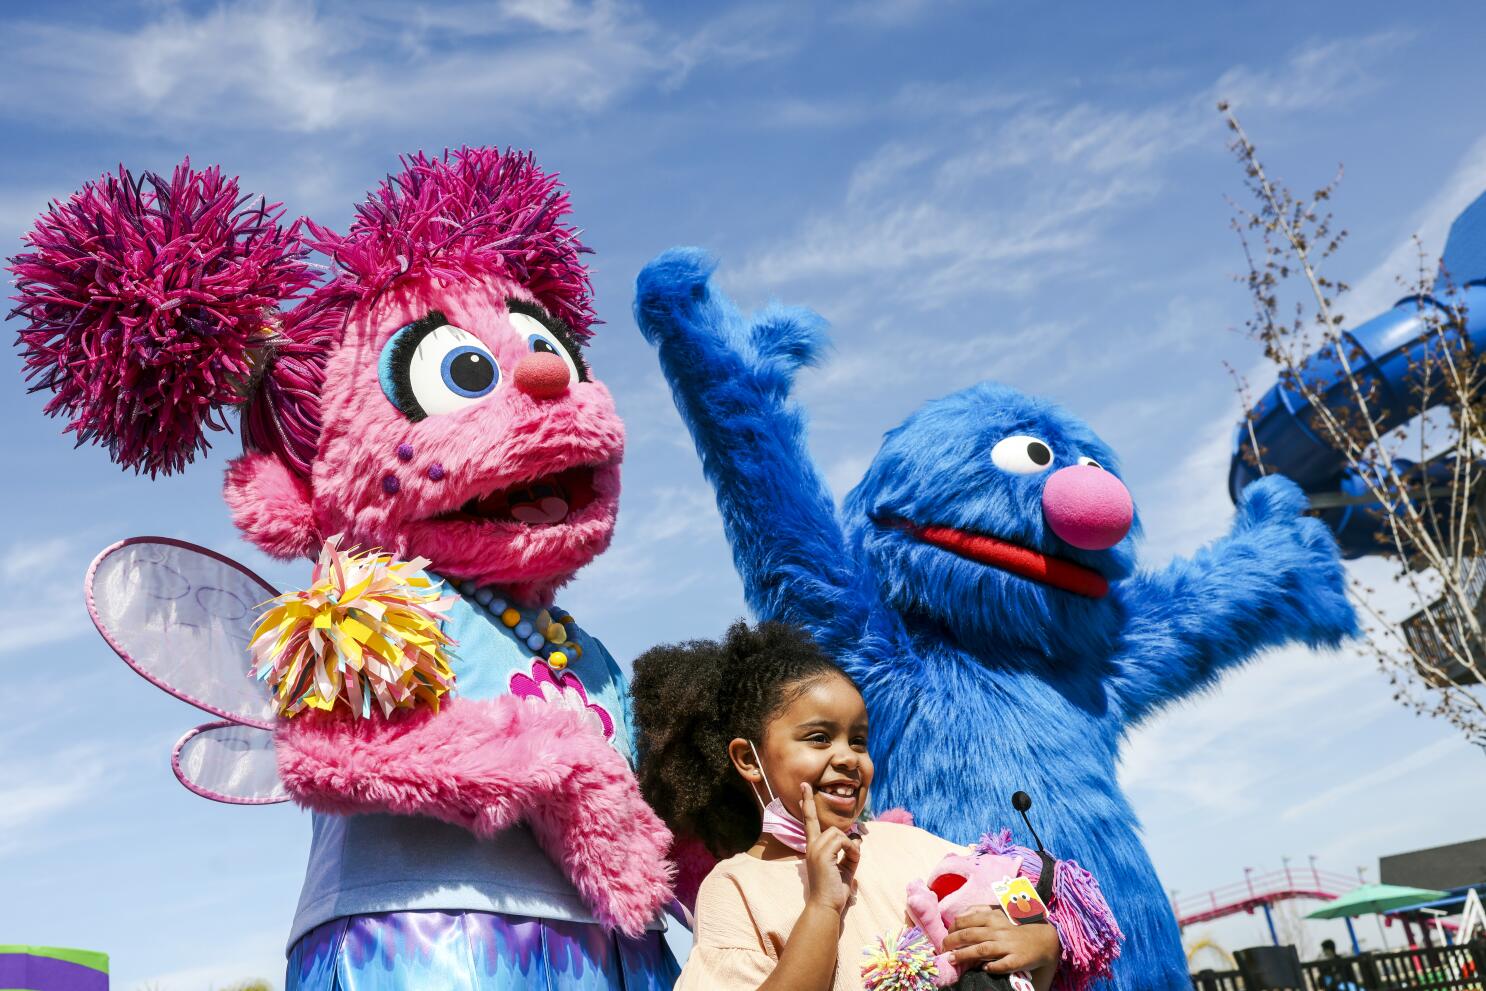 Sesame Street at 50: Five defining moments